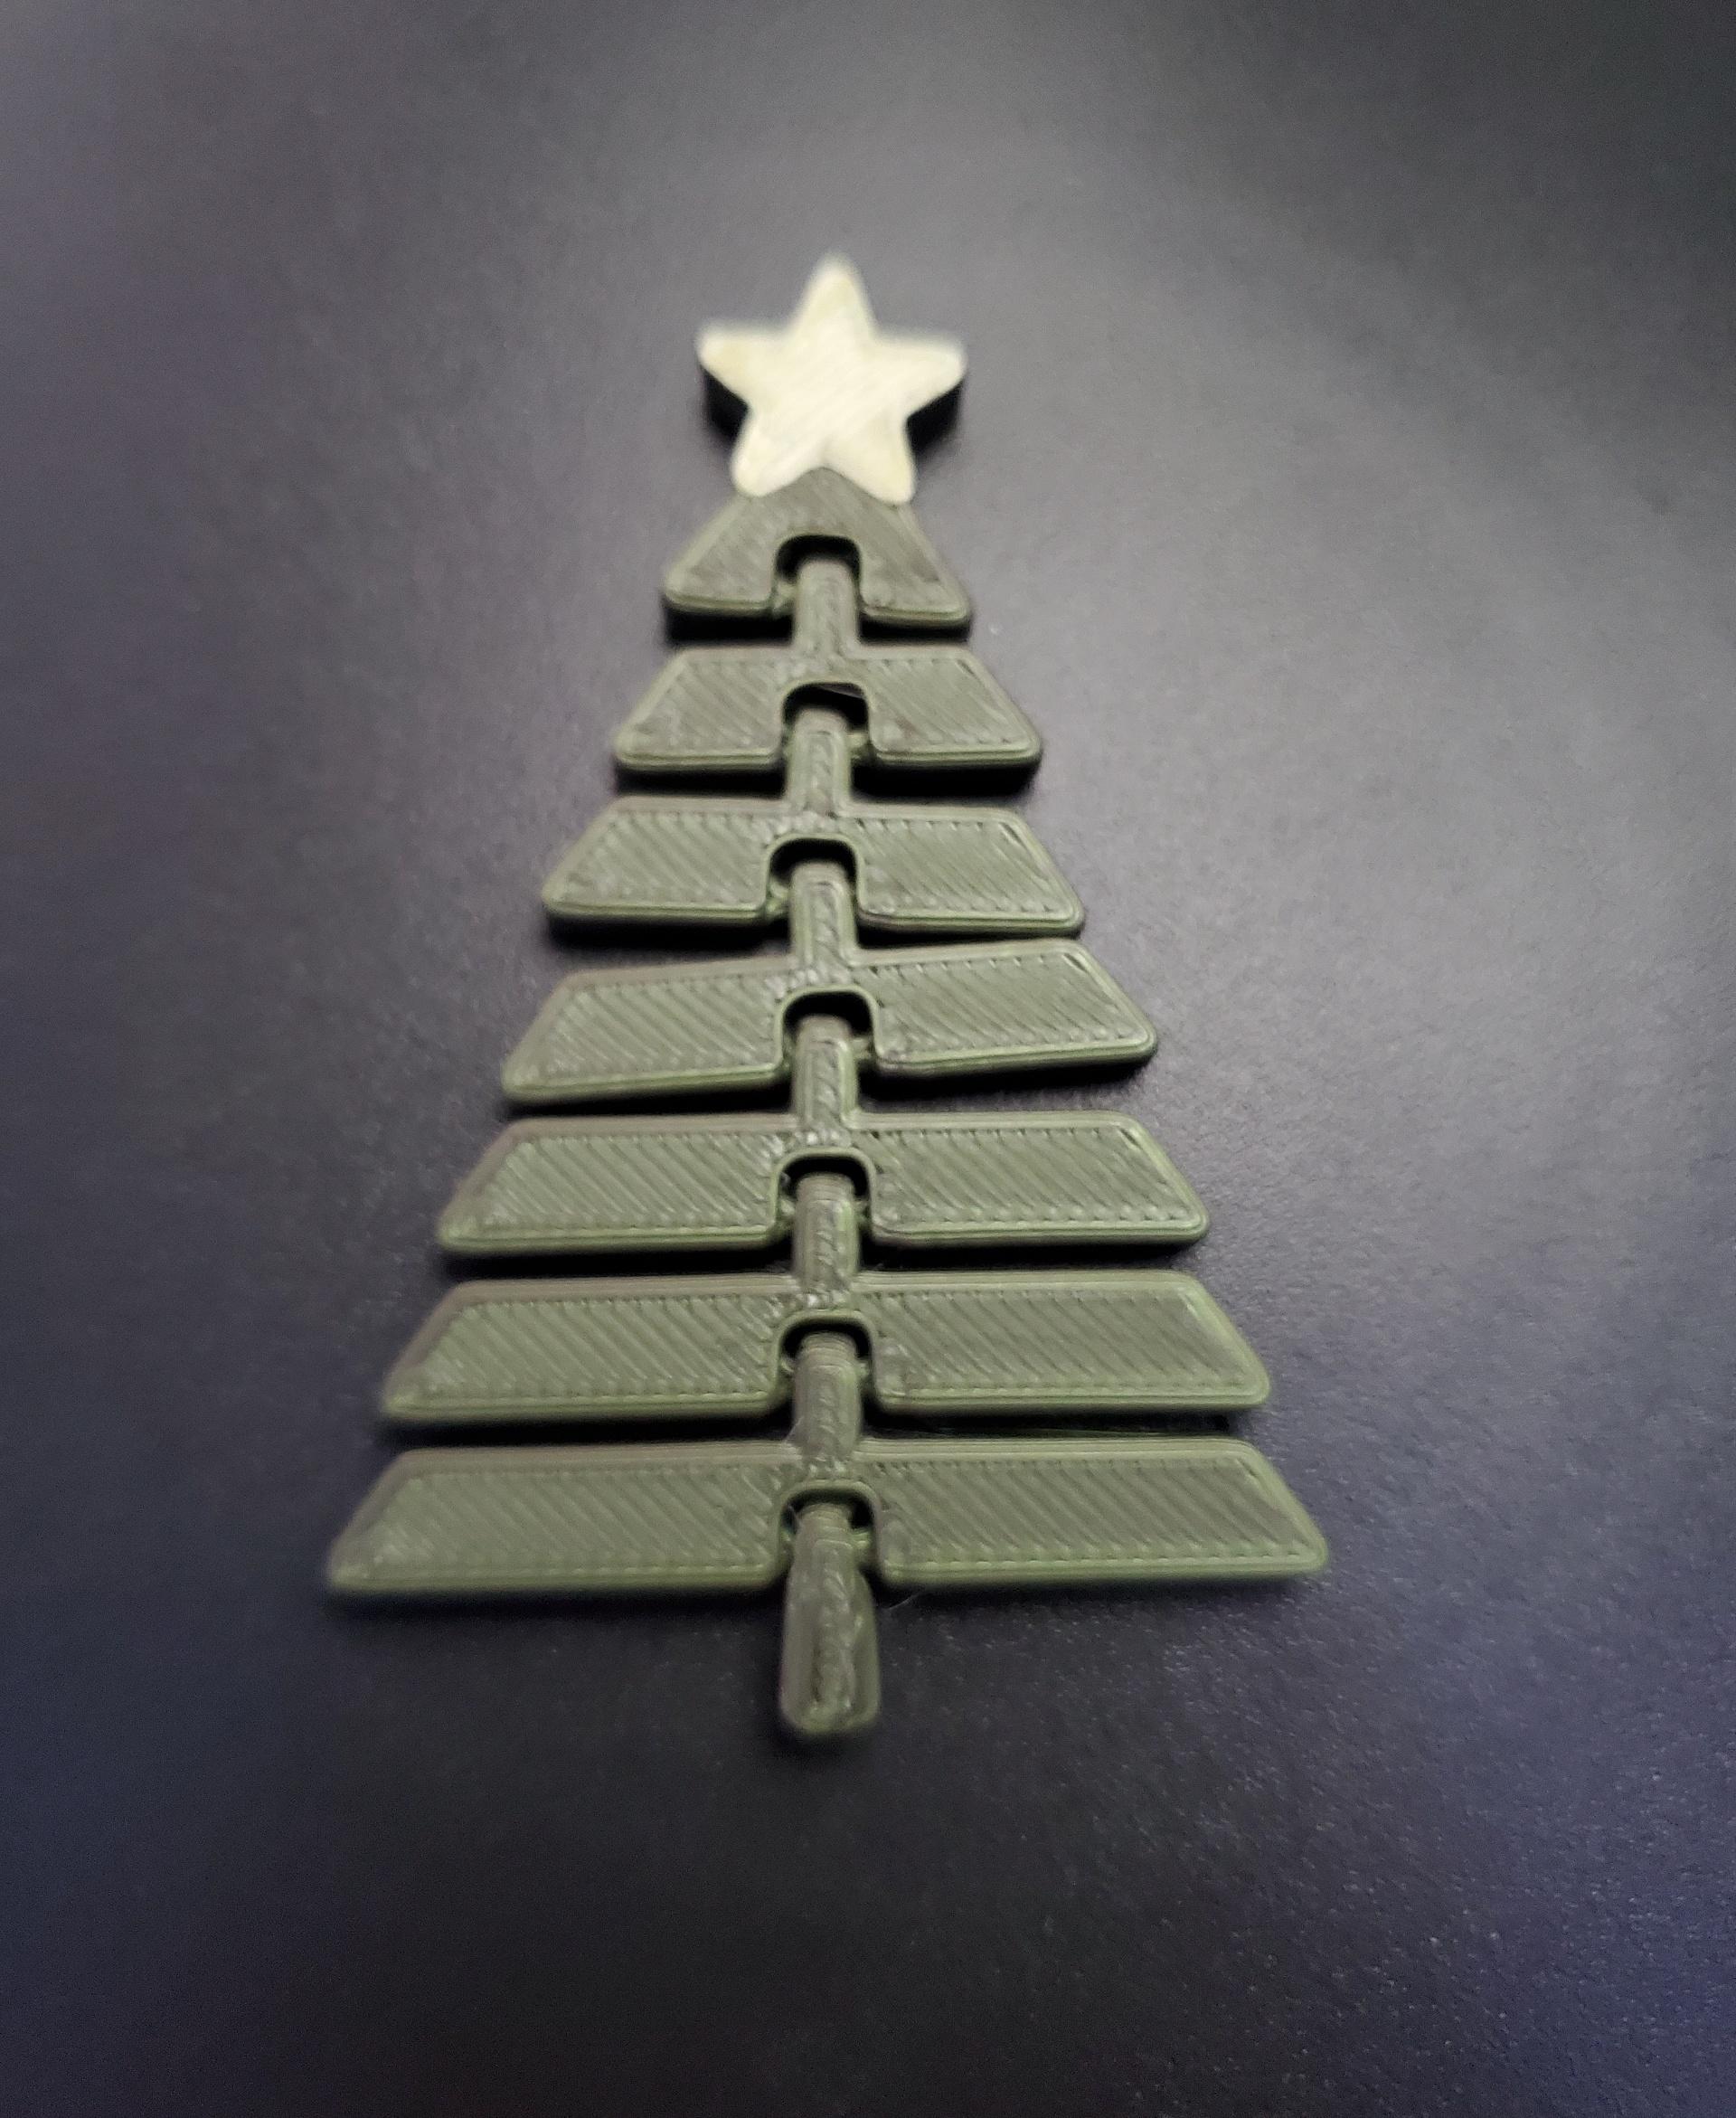 Articulated Christmas Tree with Star - Print in place fidget toy - 3mf - polyterra muted green - 3d model